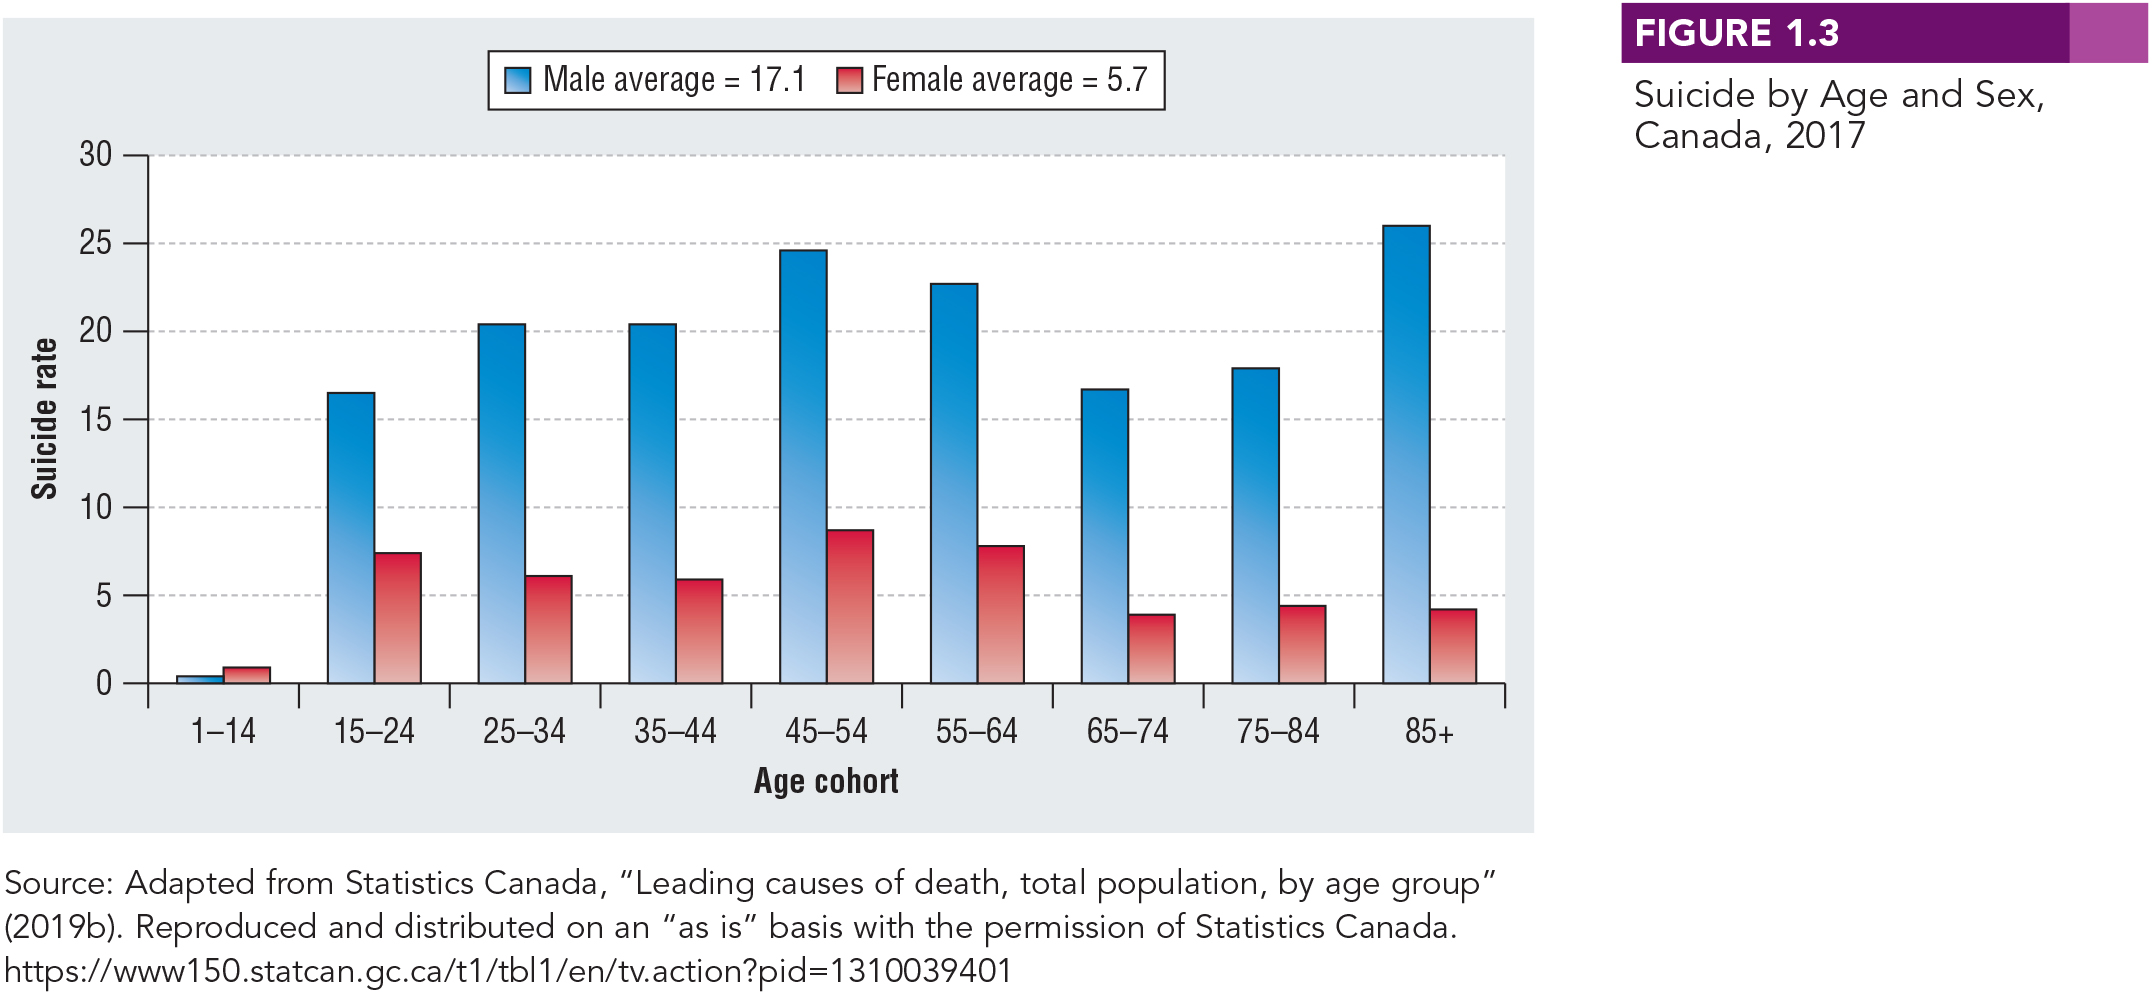 Suicide by Age and Sex, Canada, 2017